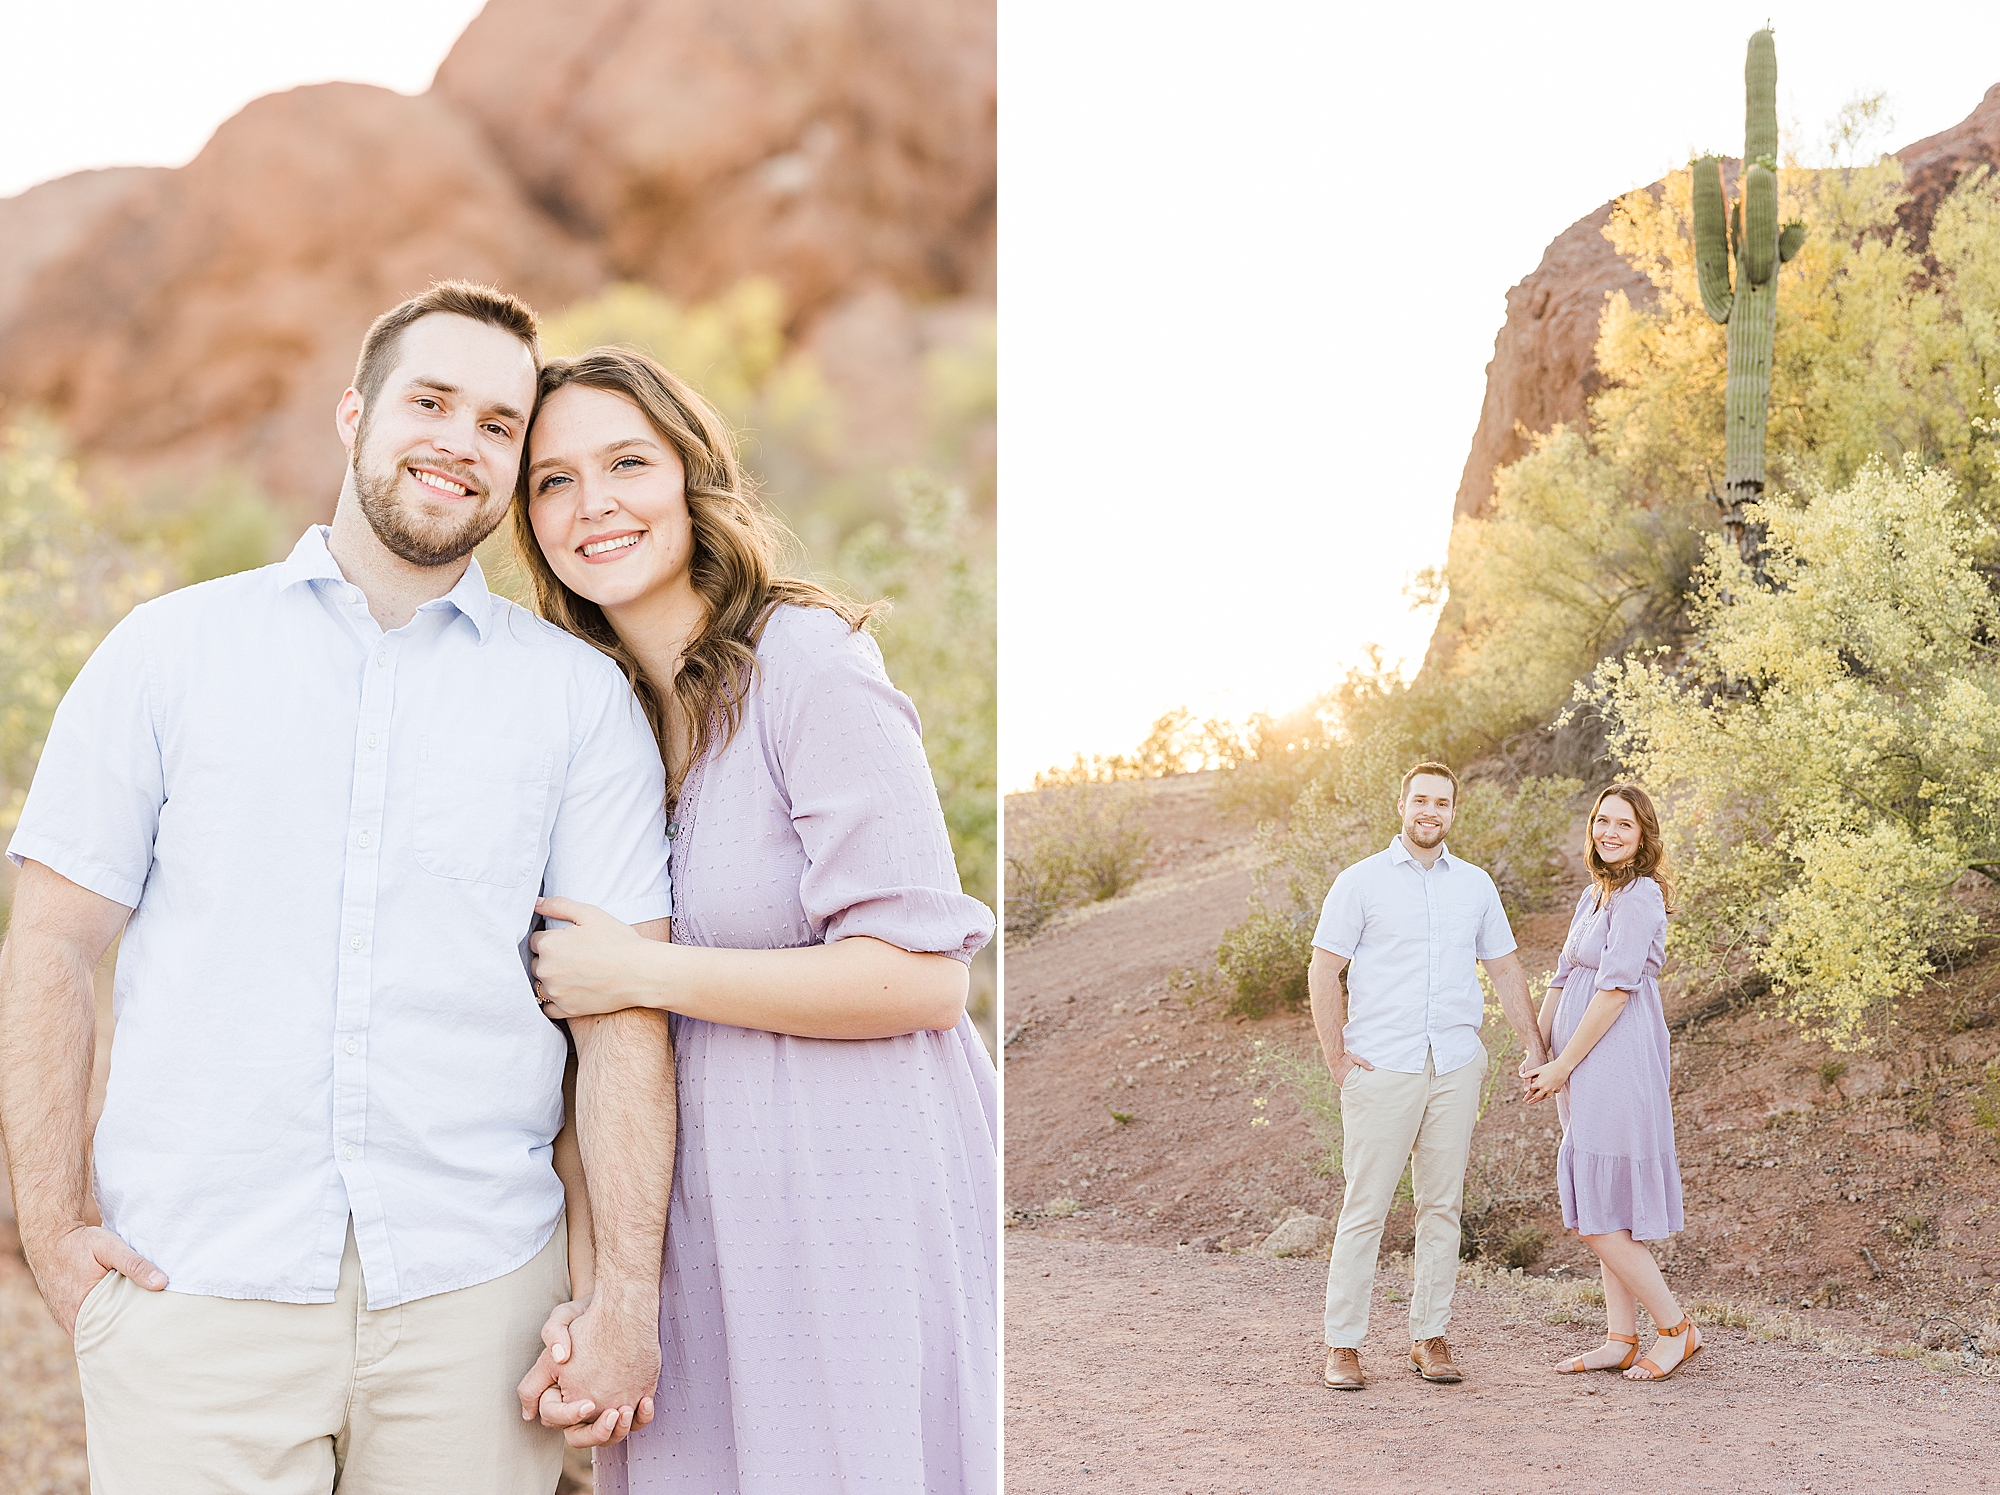 A natural setting with mountains in the background during their engagement session at Papago Park
